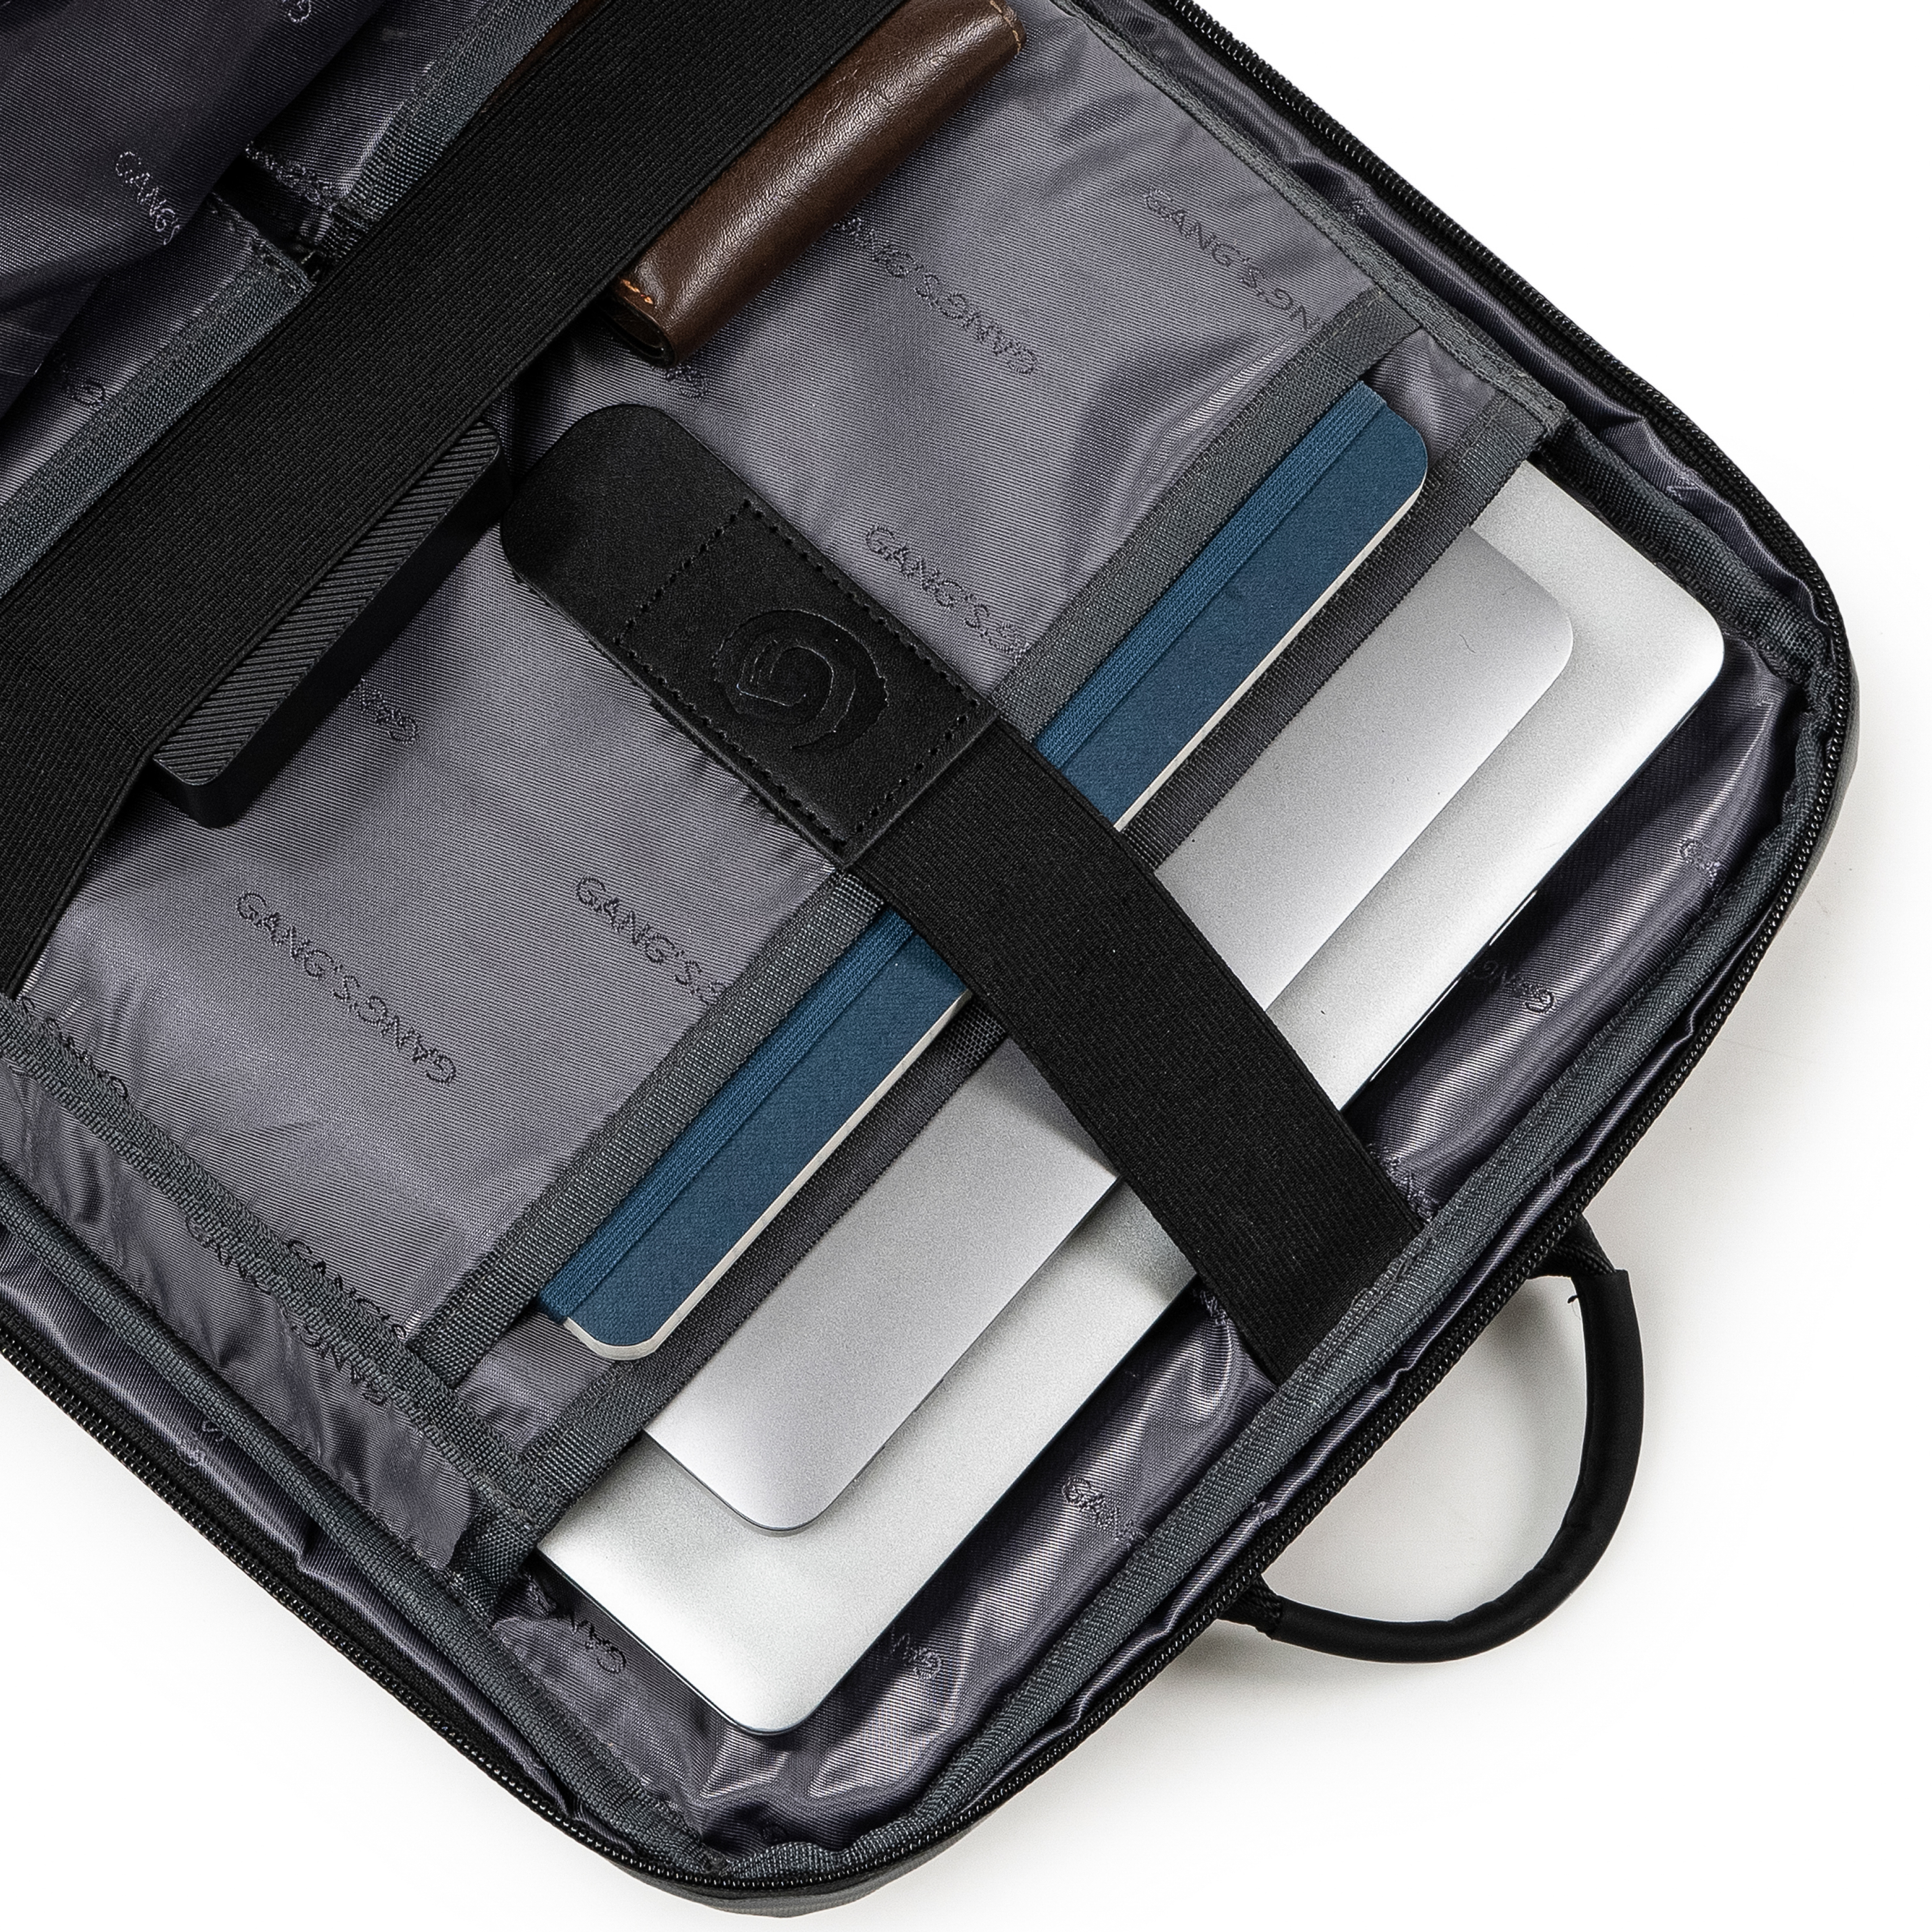 Spacious compartments backpack